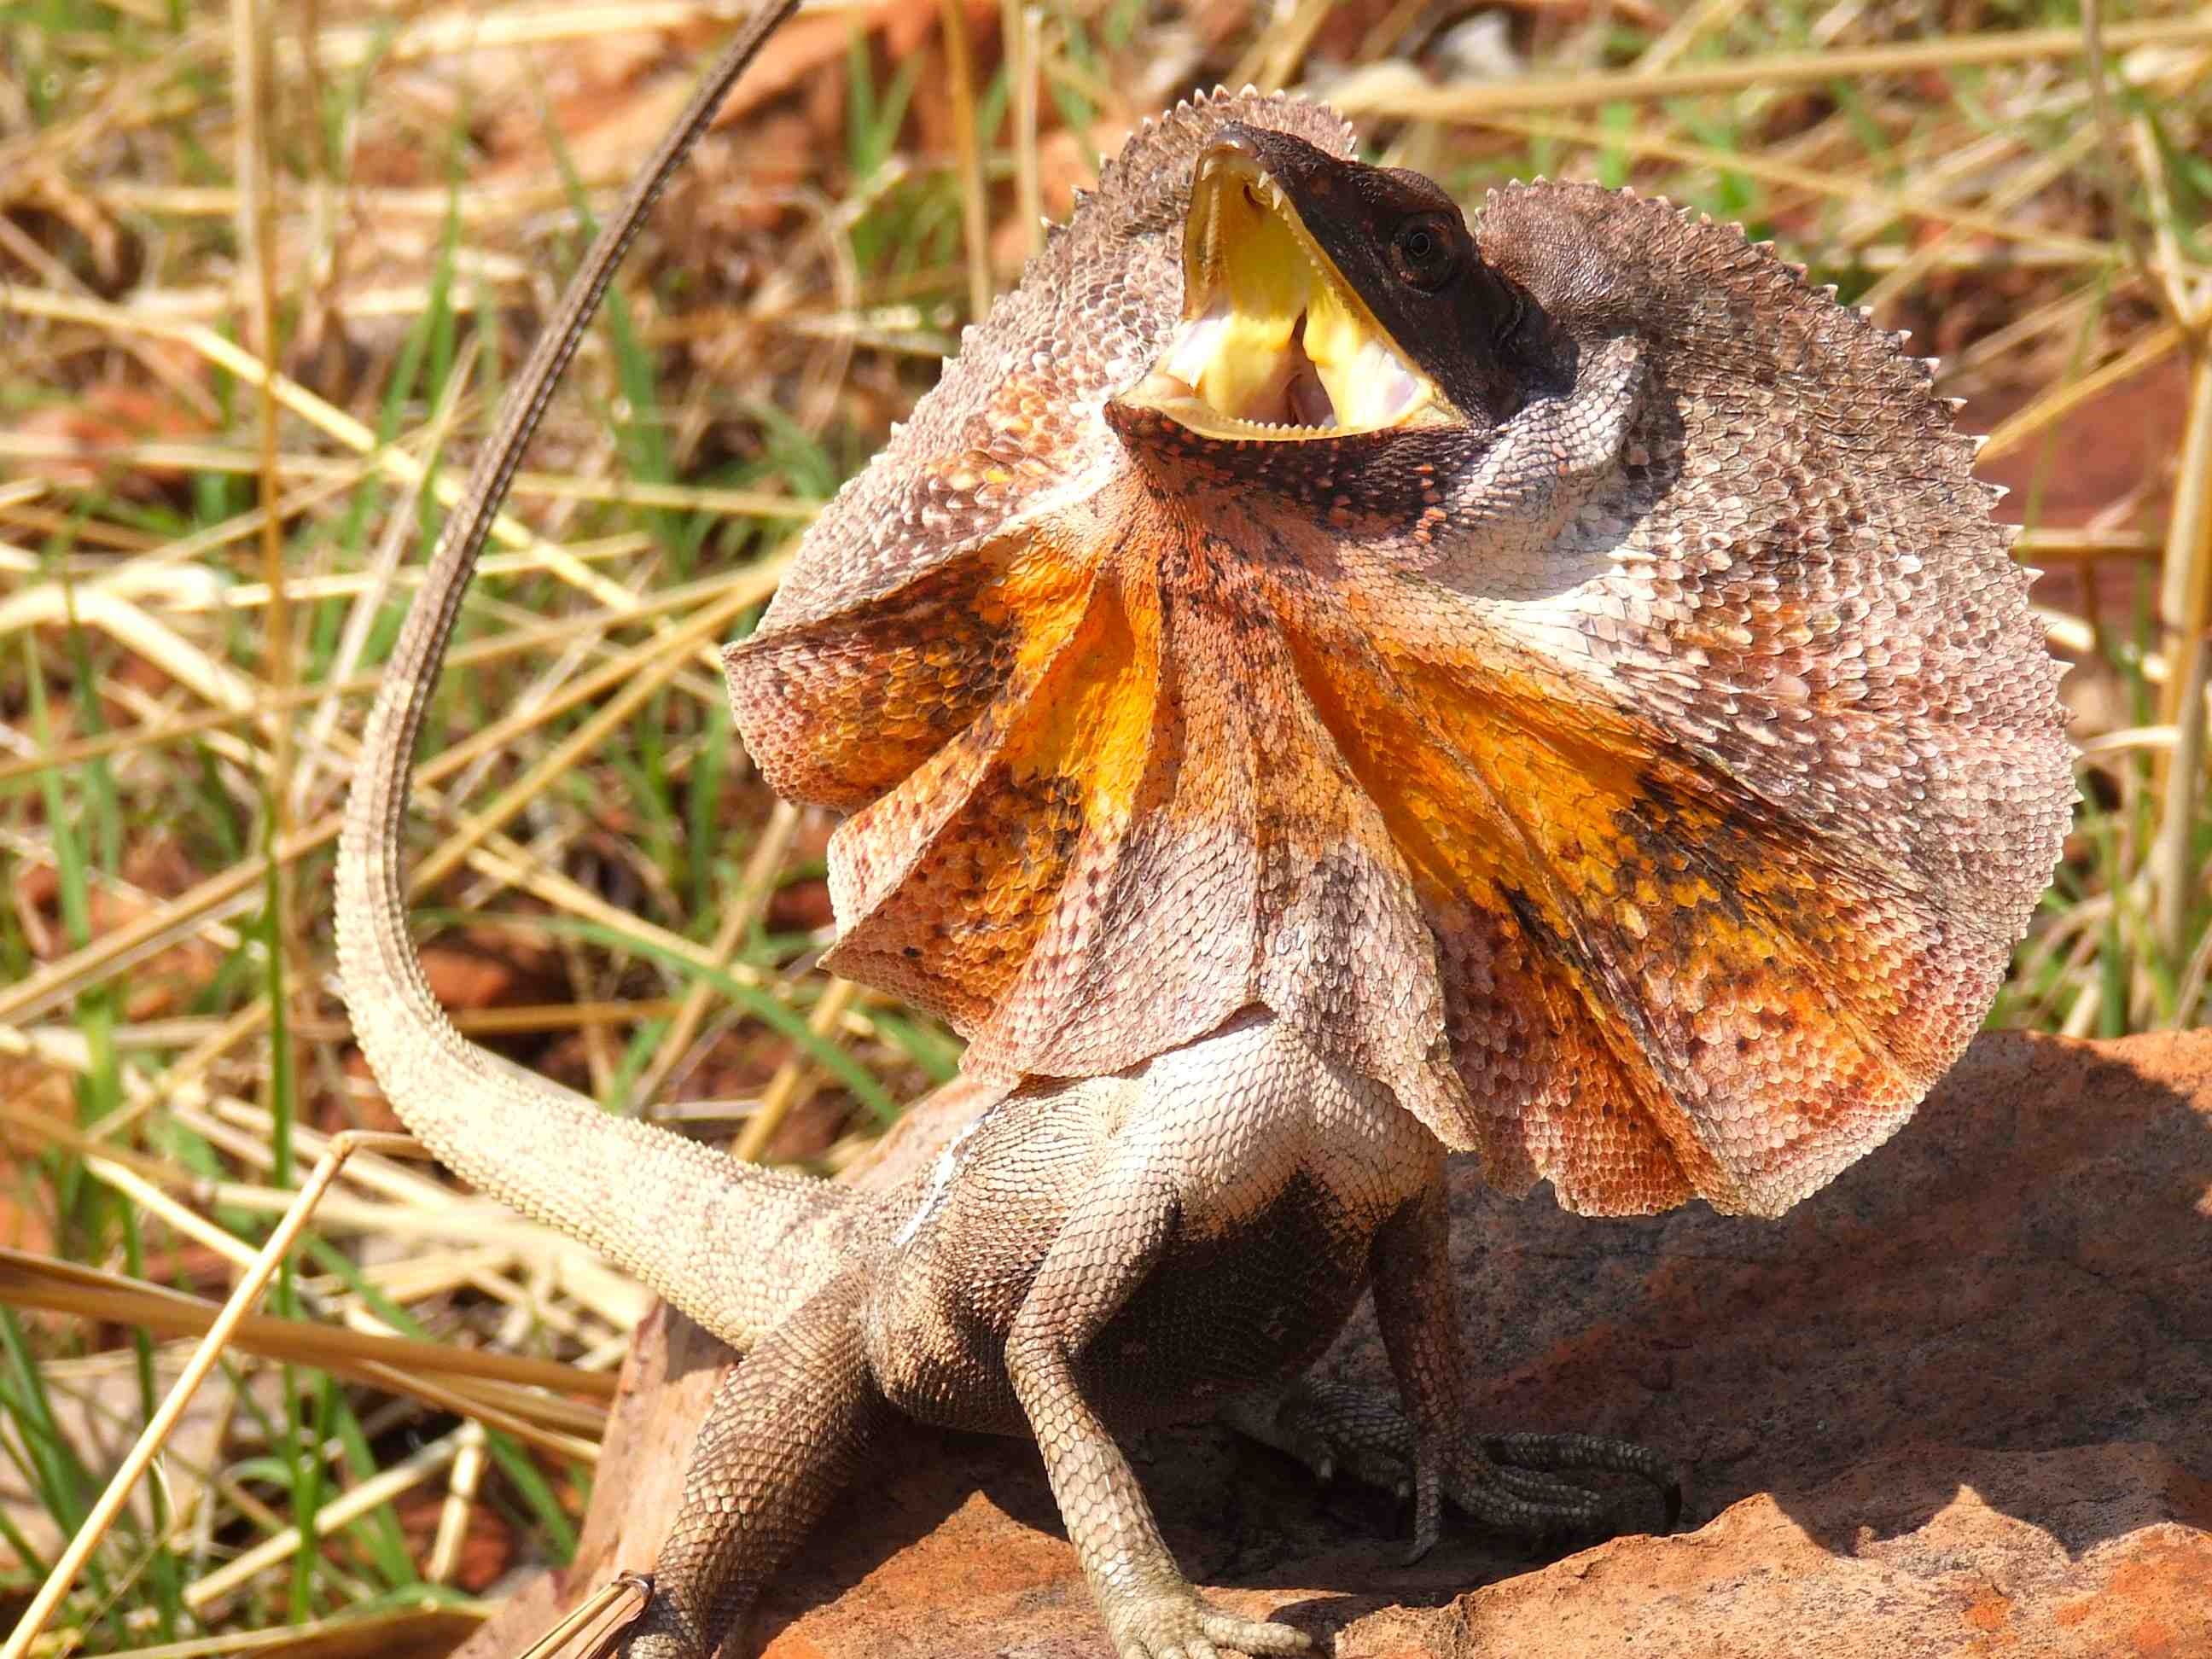 Frilled-neck lizard, Unique reptilian feature, Stunning wallpapers, High-quality images, 2600x1950 HD Desktop